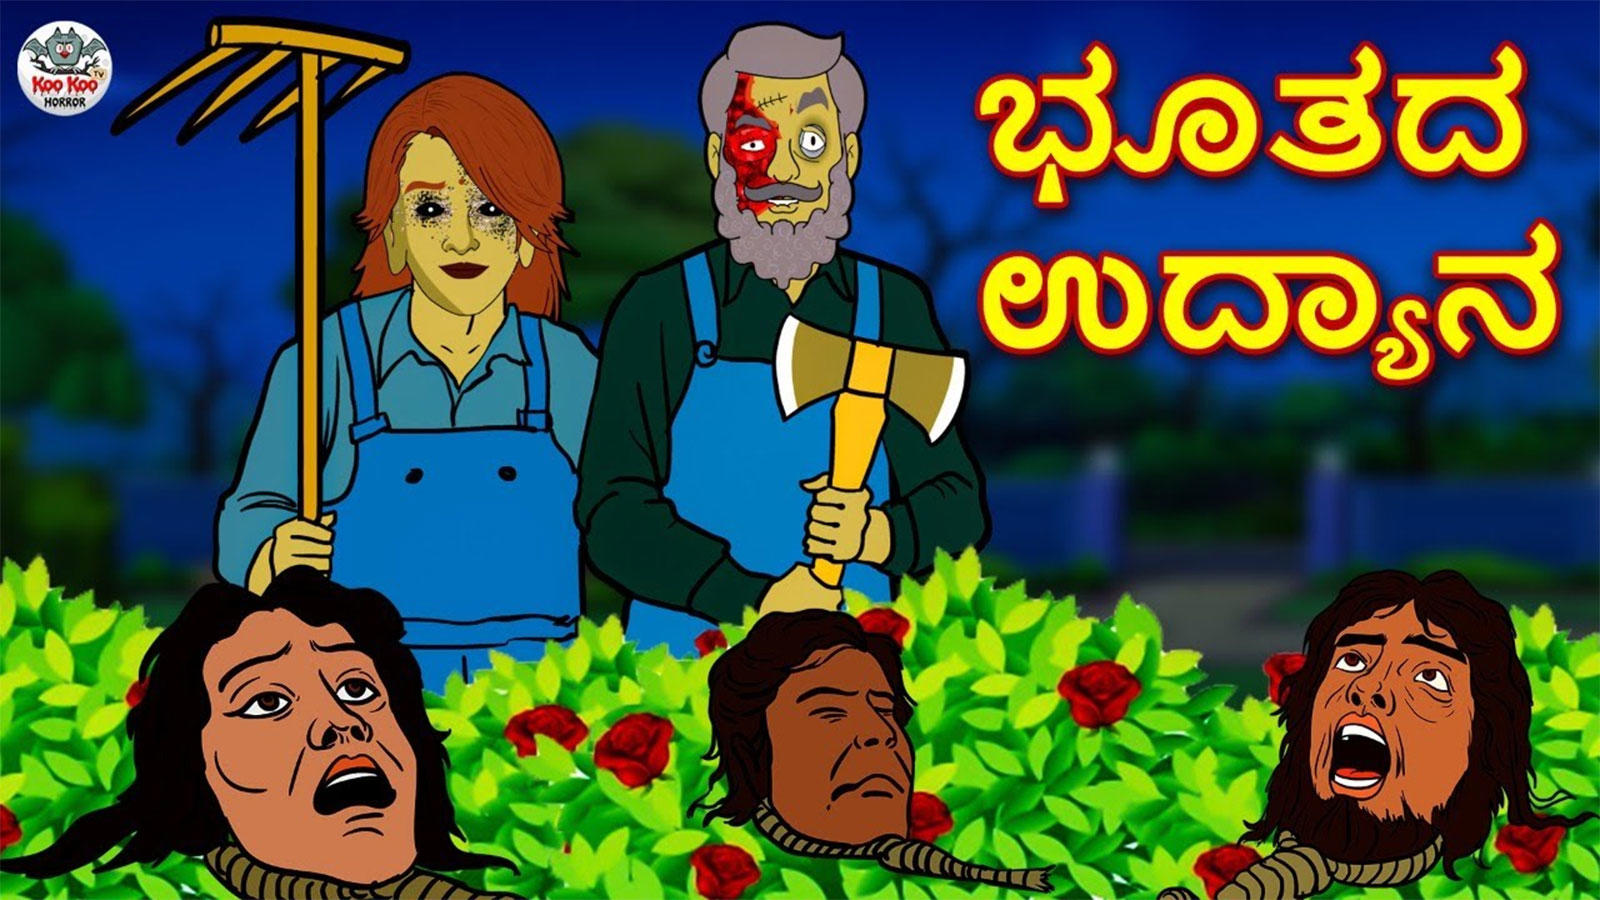 Watch Latest Children Kannada Nursery Horror Story 'ಭೂತದ ಉದ್ಯಾನ - The  Haunted Garden' for Kids - Check Out Children's Nursery Stories, Baby  Songs, Fairy Tales In Kannada | Entertainment - Times of India Videos